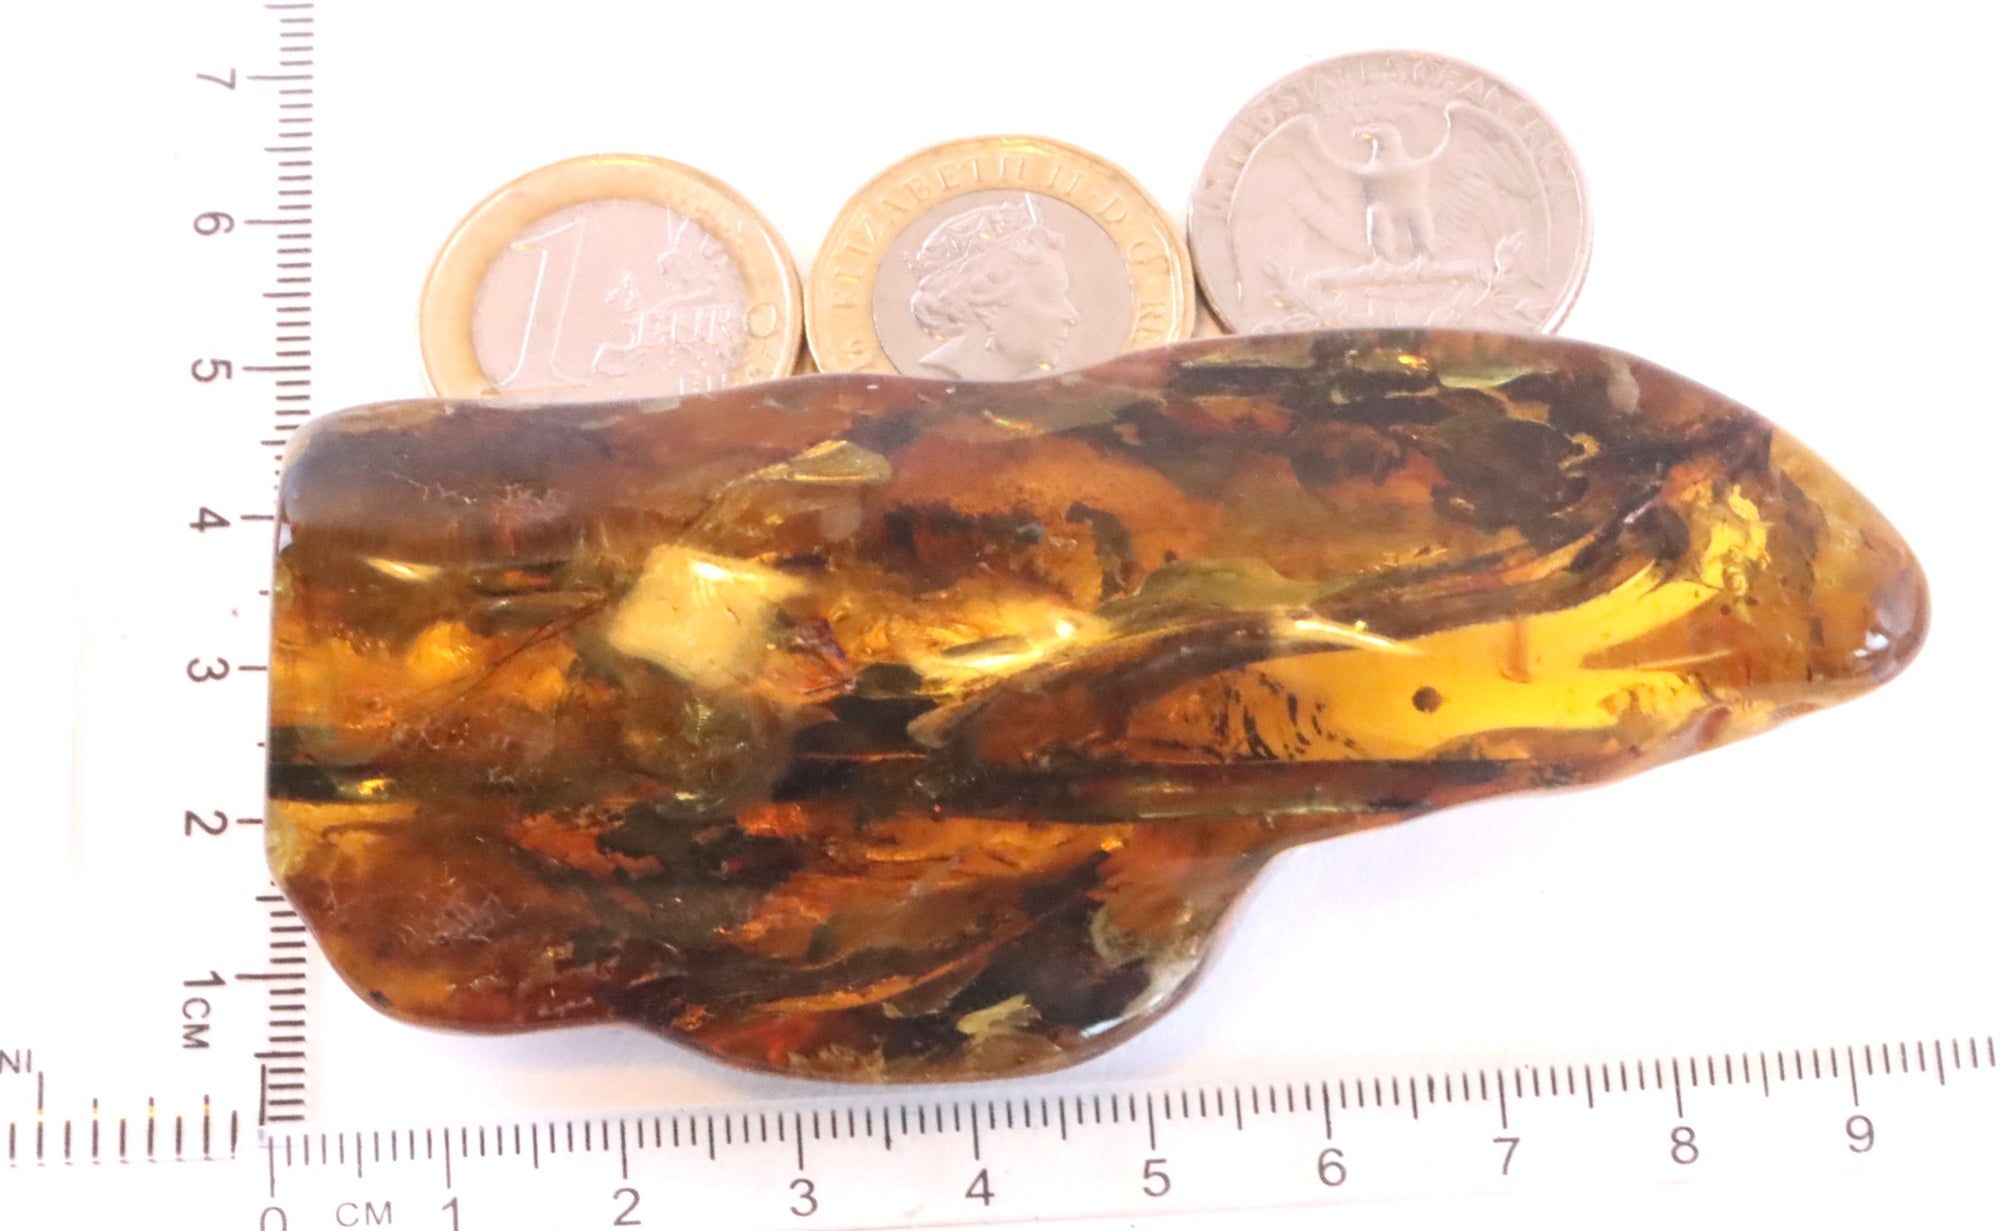 Large 55g Baltic Amber Gemstone With Inclusions